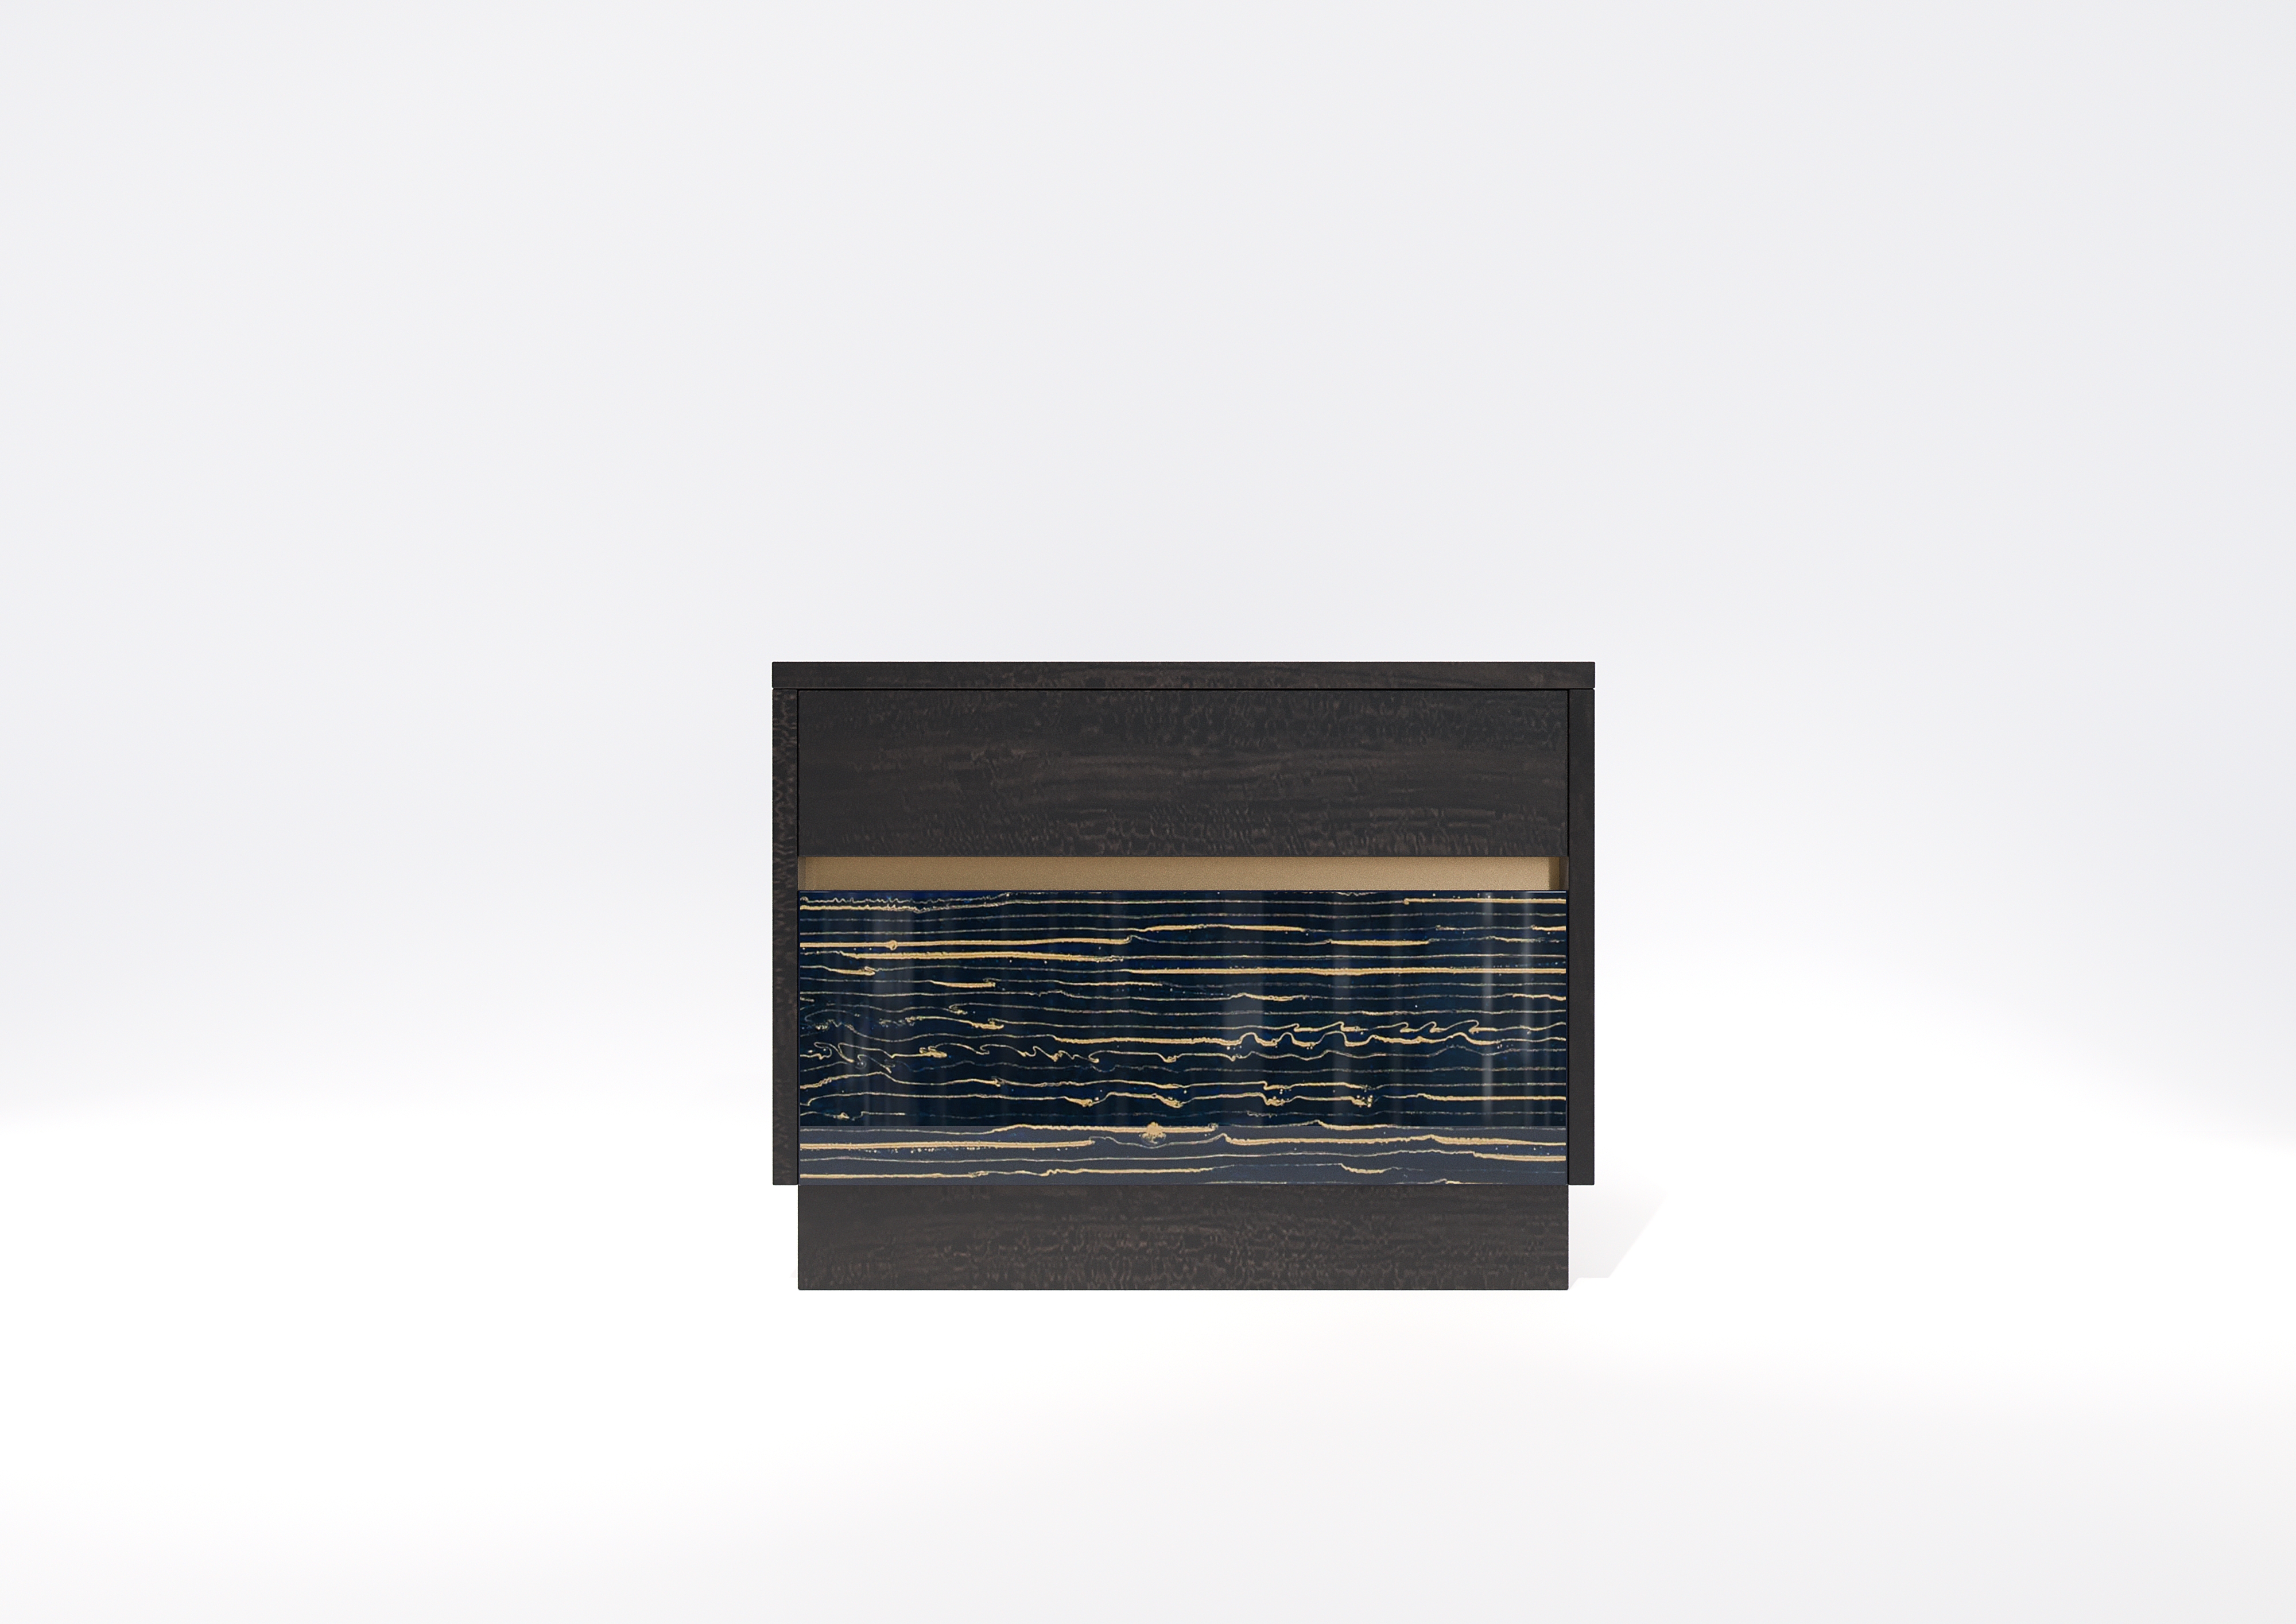 Downing Nightstand V2 Wood Edition #07 – $3,255.00